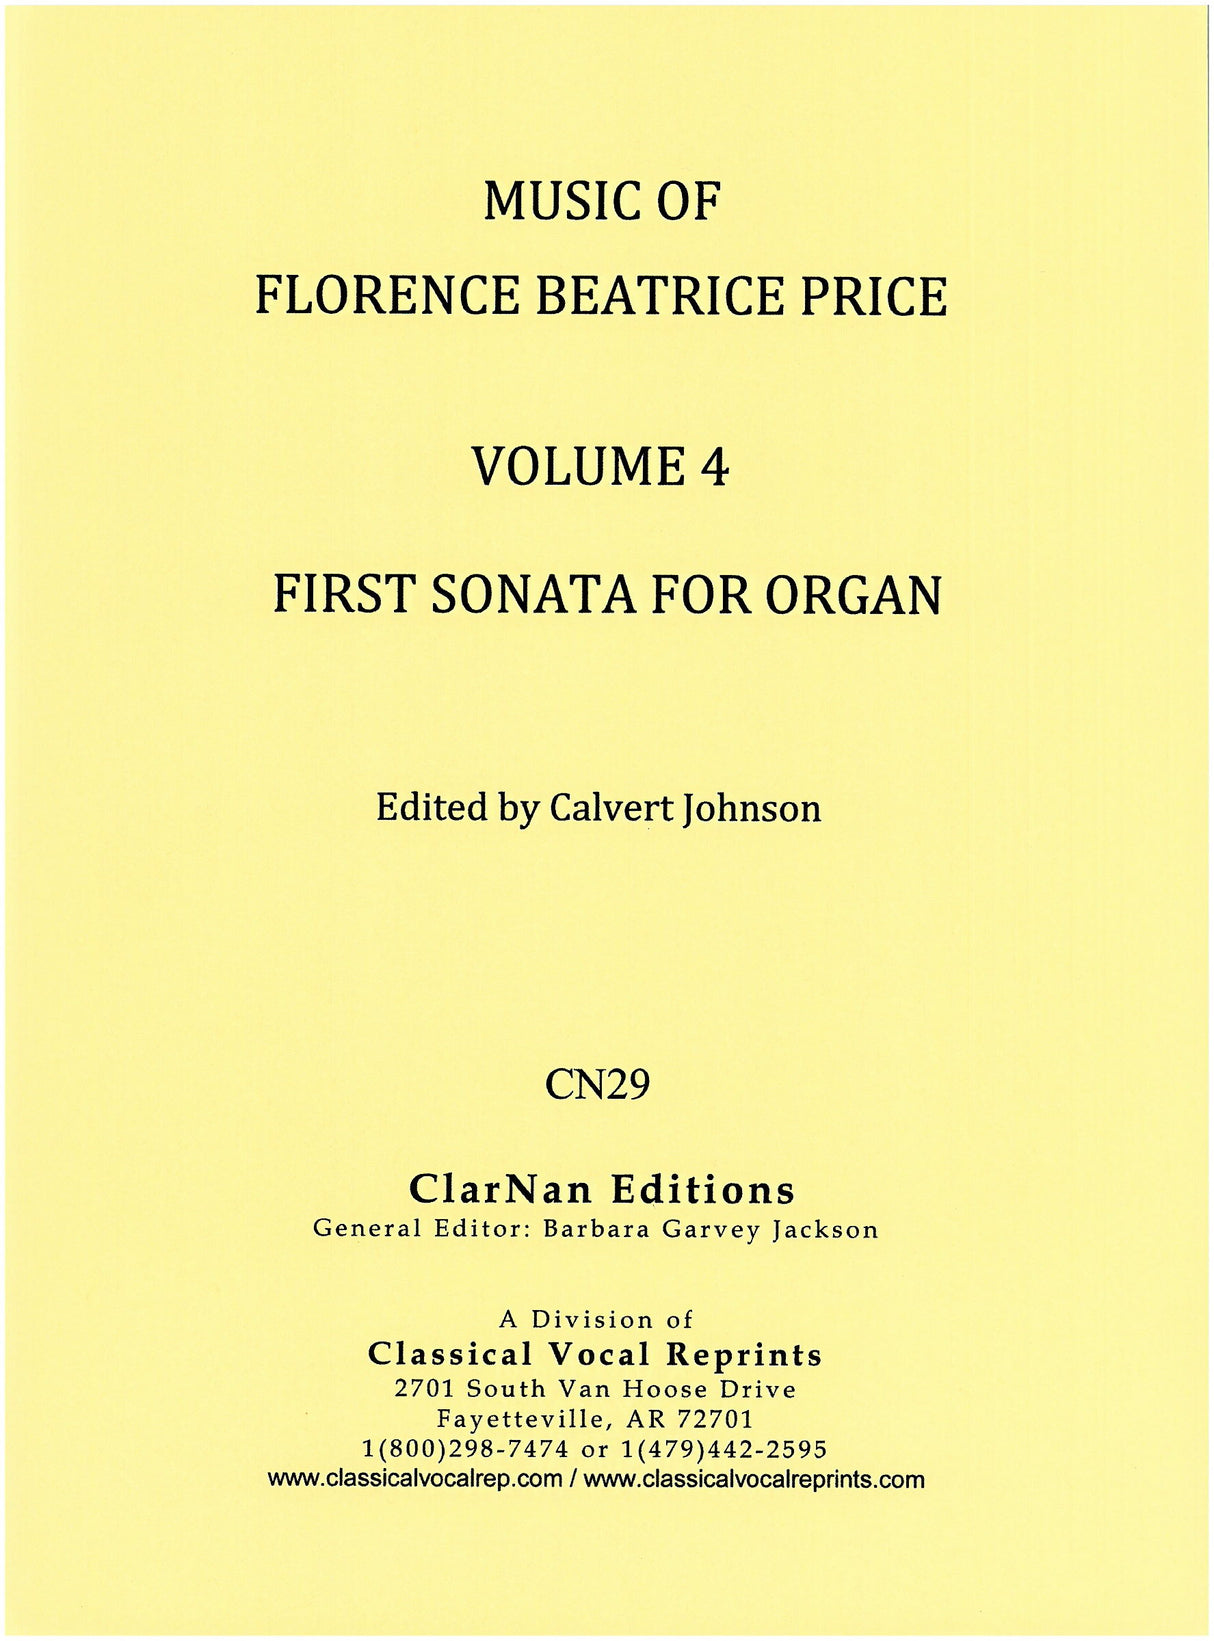 Price: First Sonata for Organ